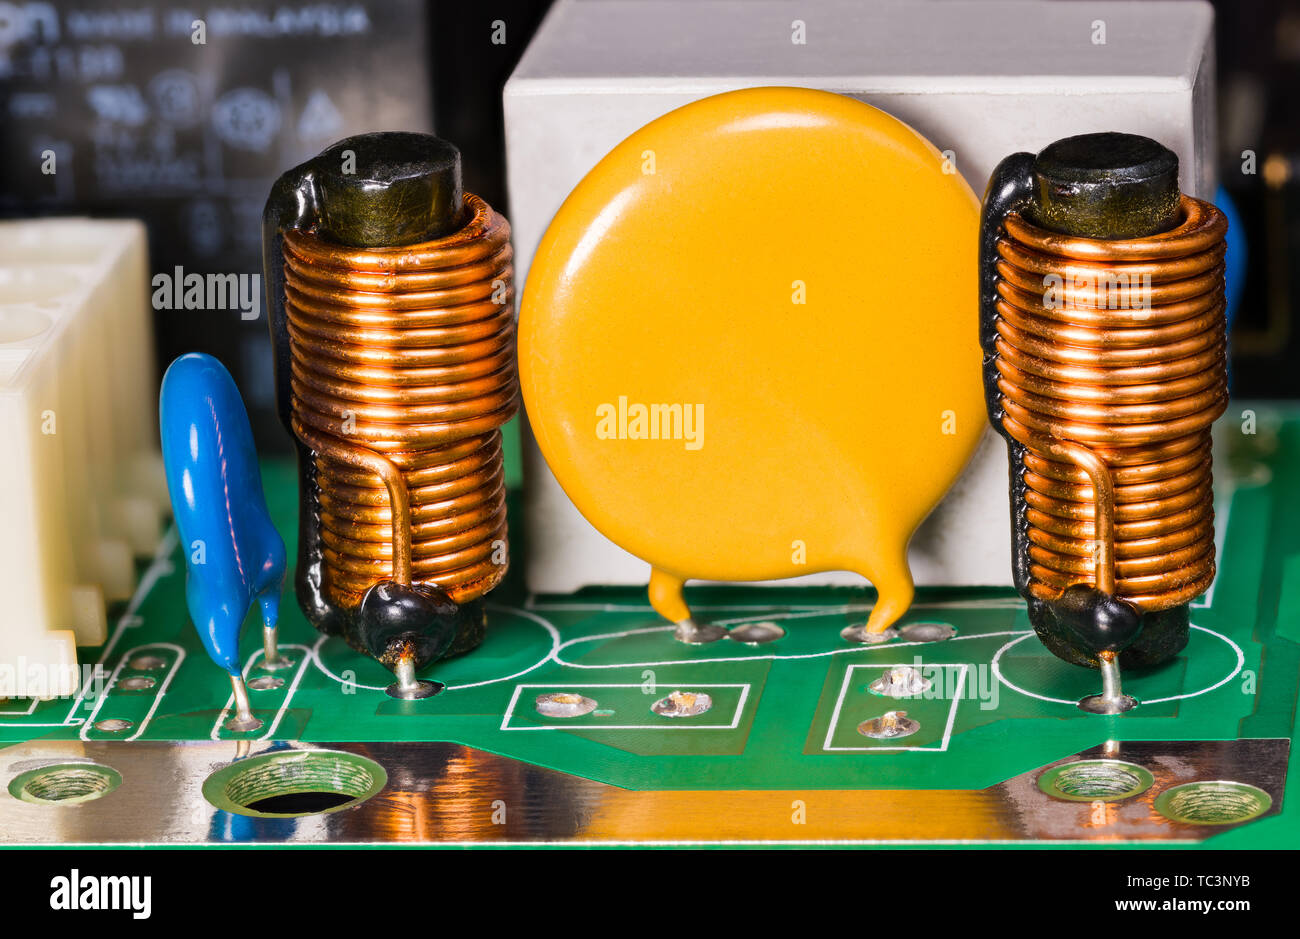 Varistor, cylindrical induction coils, capacitor and relay on green circuit board. Electro background with copy space on yellow round electronic part. Stock Photo